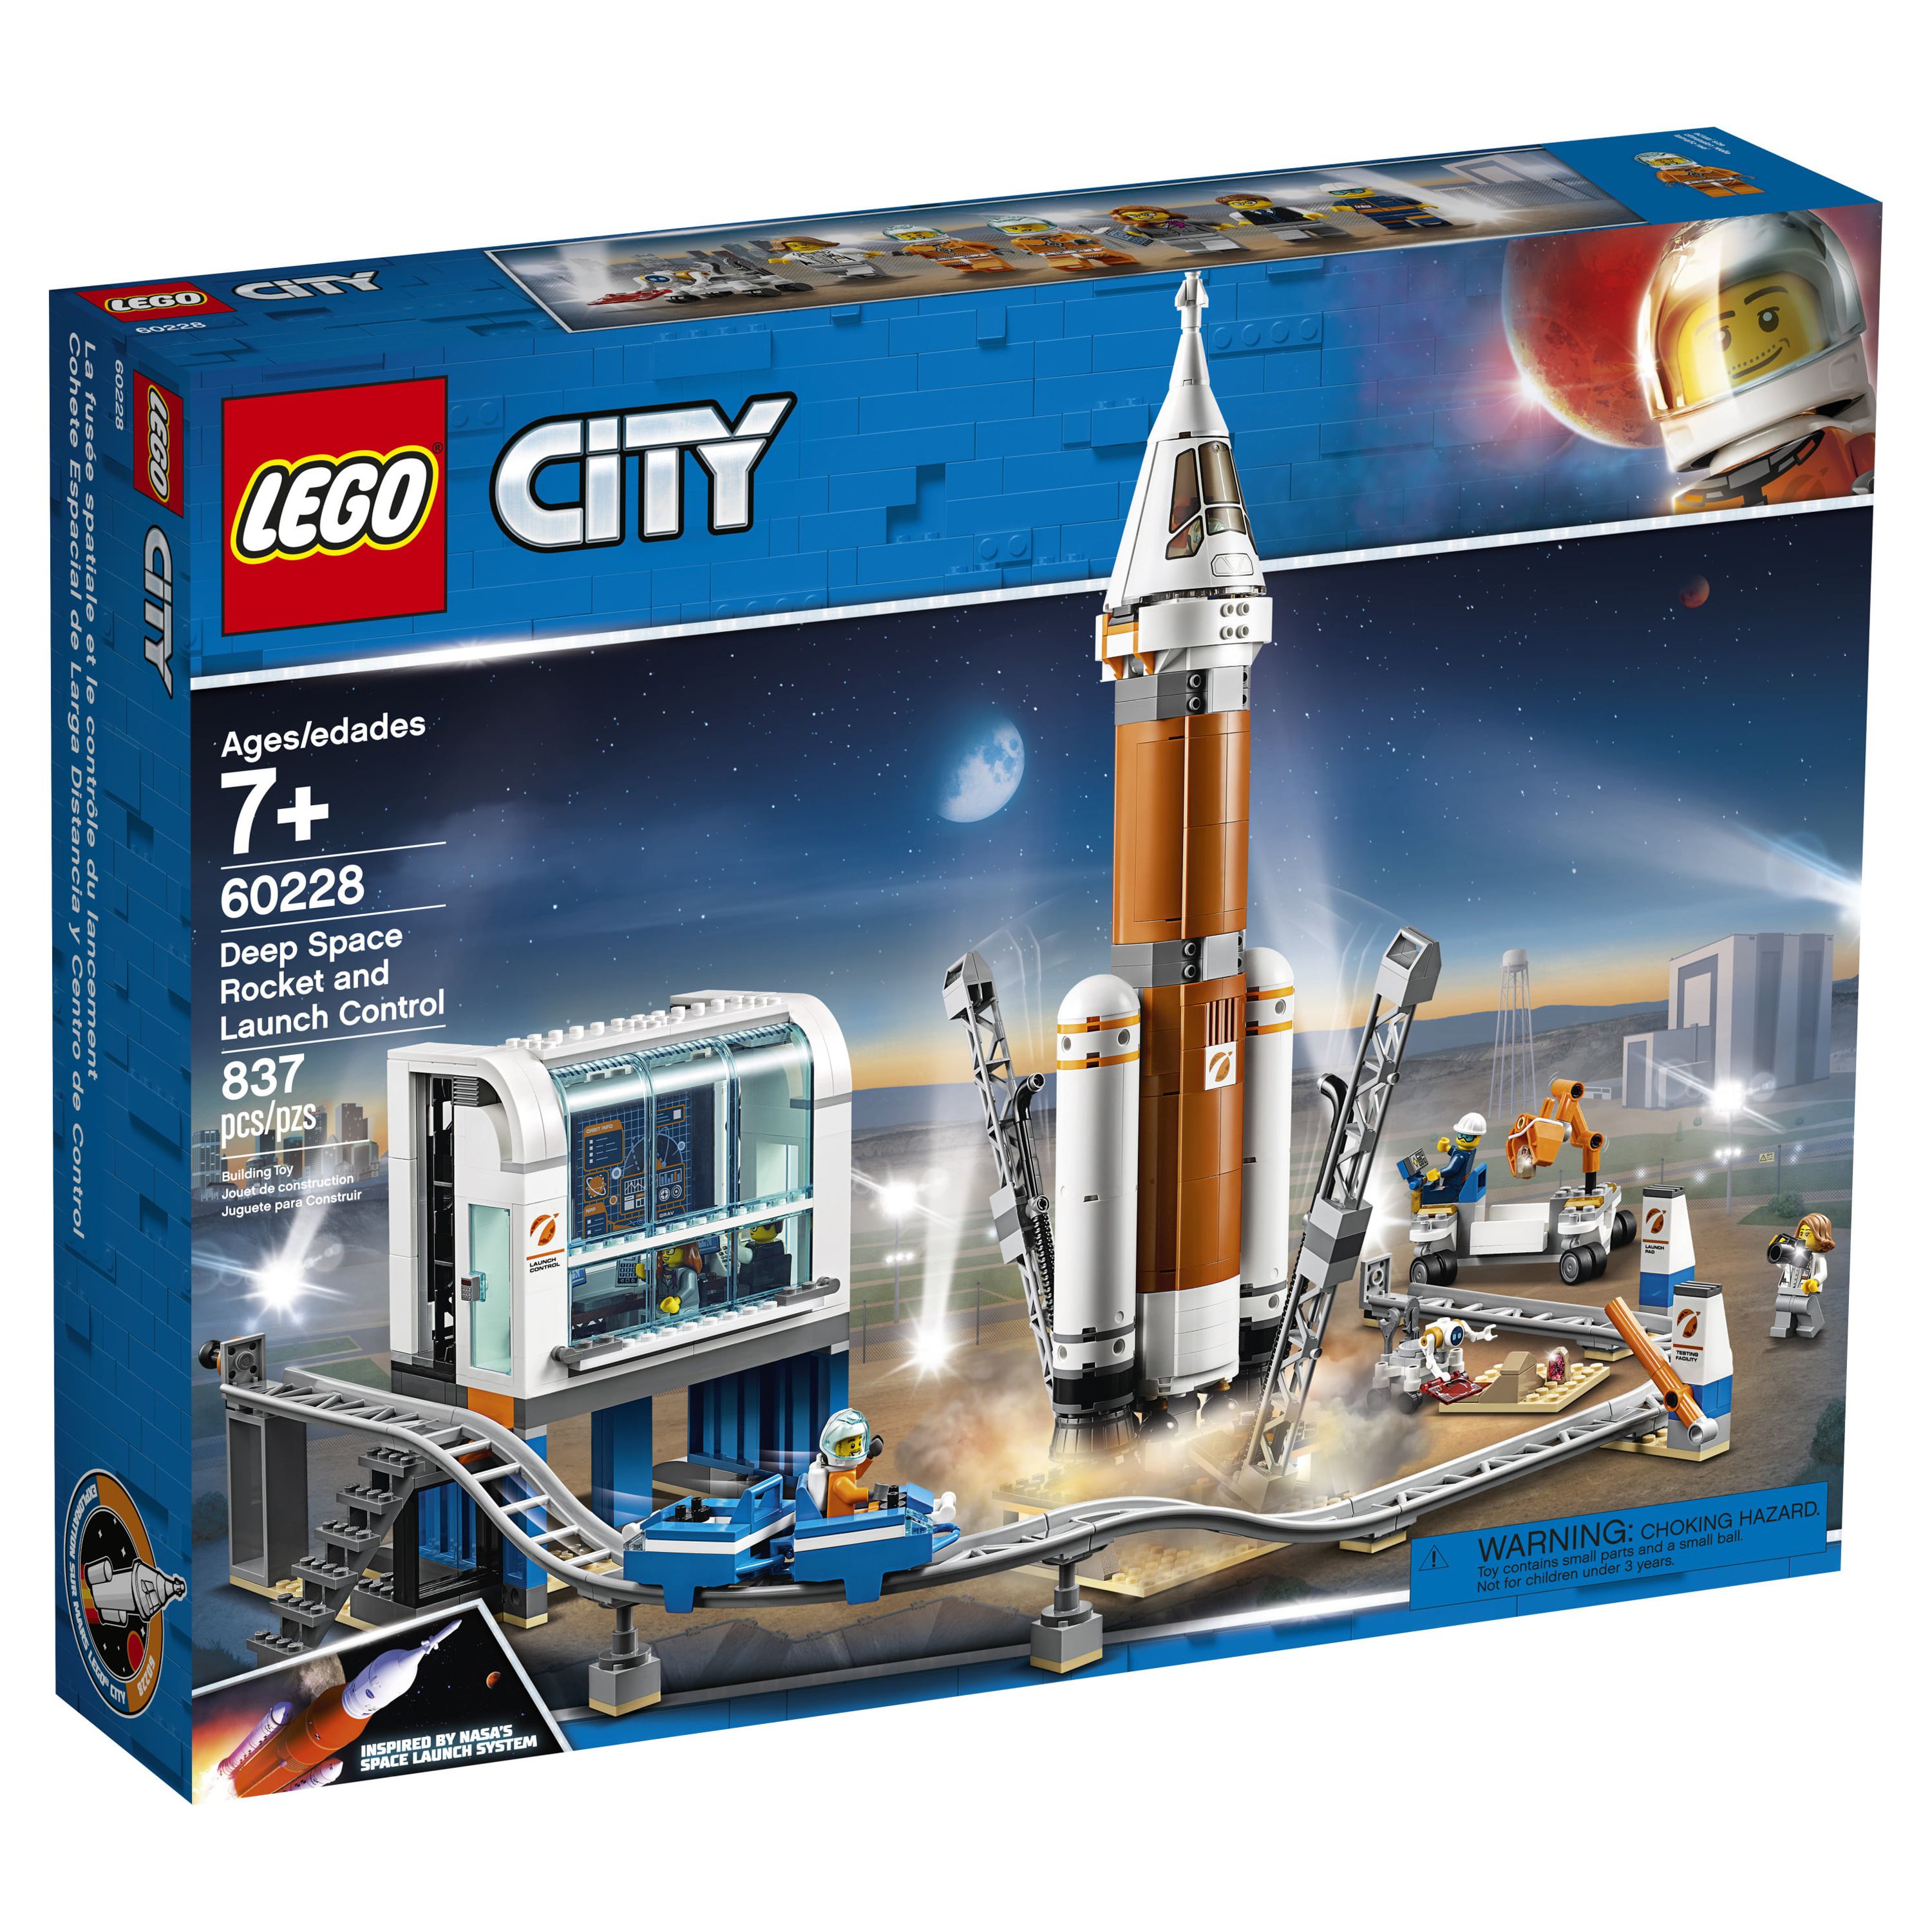 LEGO City Space Deep Space Rocket Launch Control 60228 with Toy Monorail - image 5 of 6